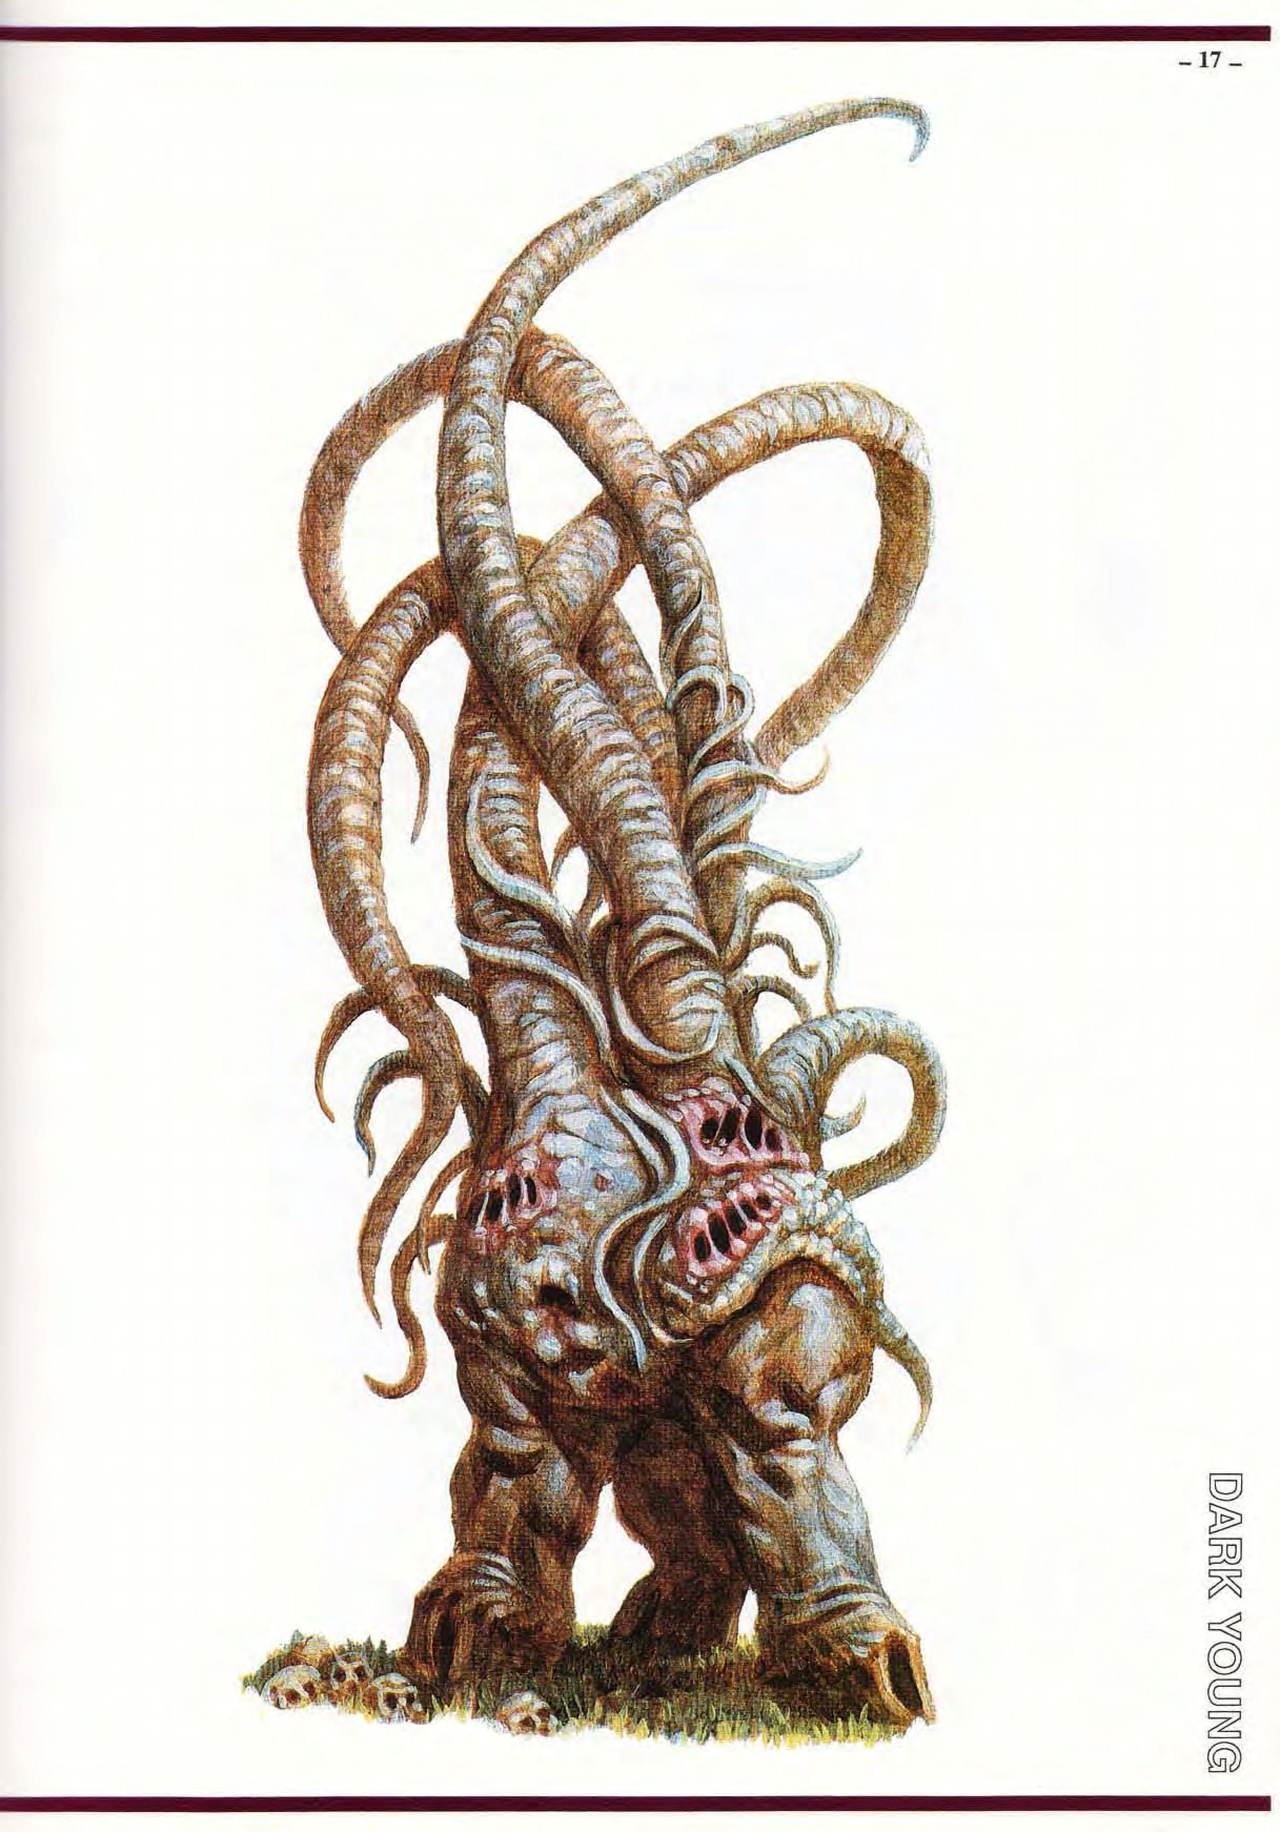 S. Petersen's Field Guide to Cthulhu Monsters 16